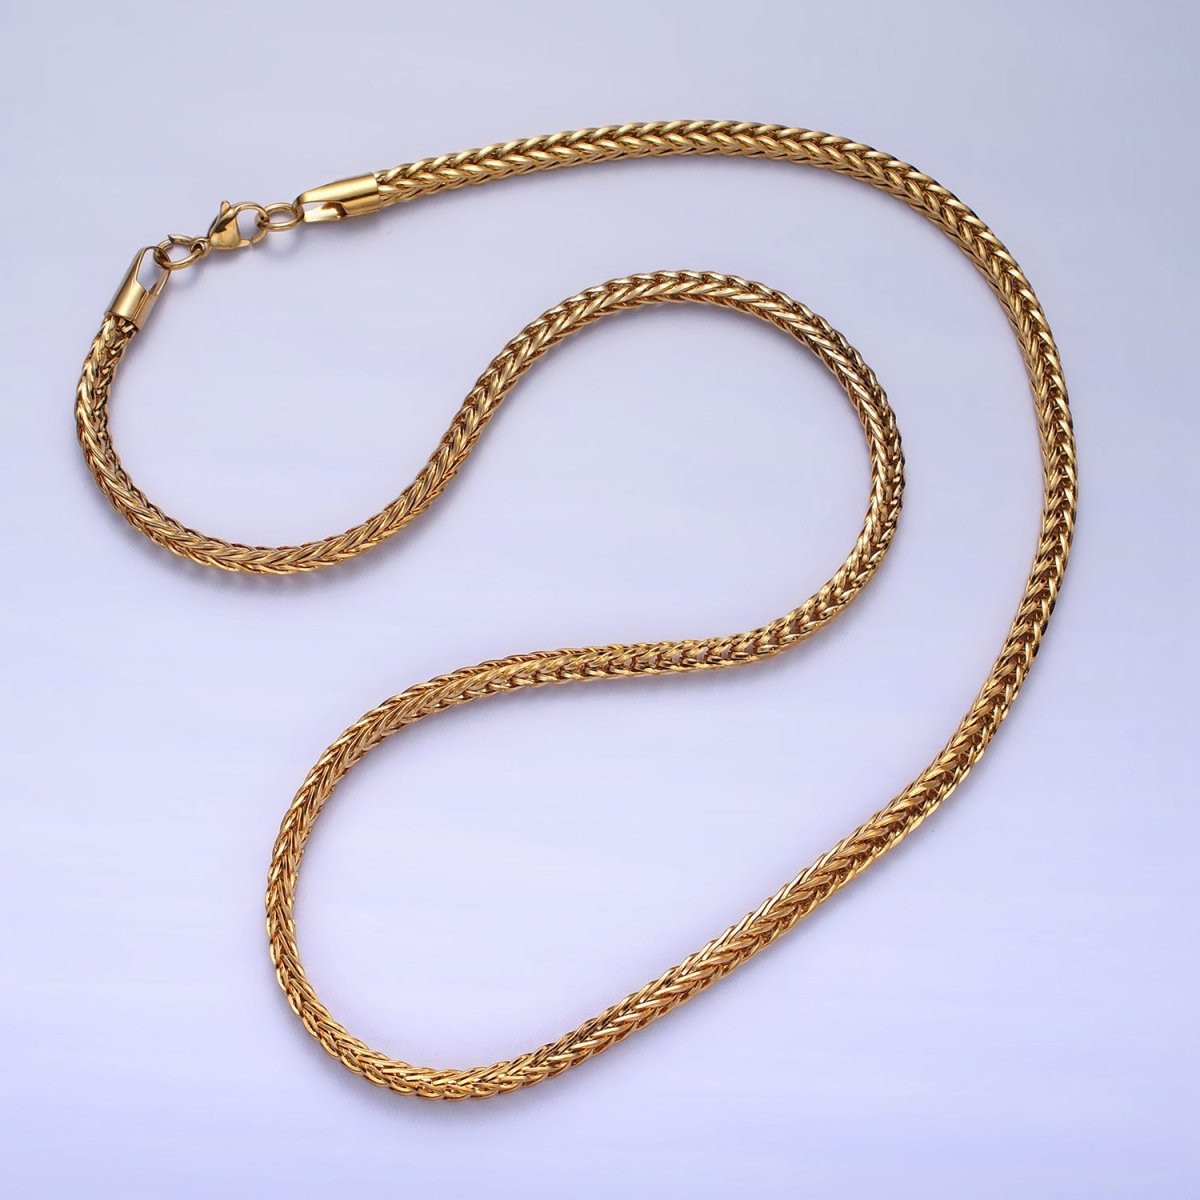 Long Gold Foxtail Wheat Chain Necklace Stainless Steel 4.2mm Thick Men's Chain 23.5 inch Necklace | WA-1625 WA-1626 Clearance Pricing - DLUXCA